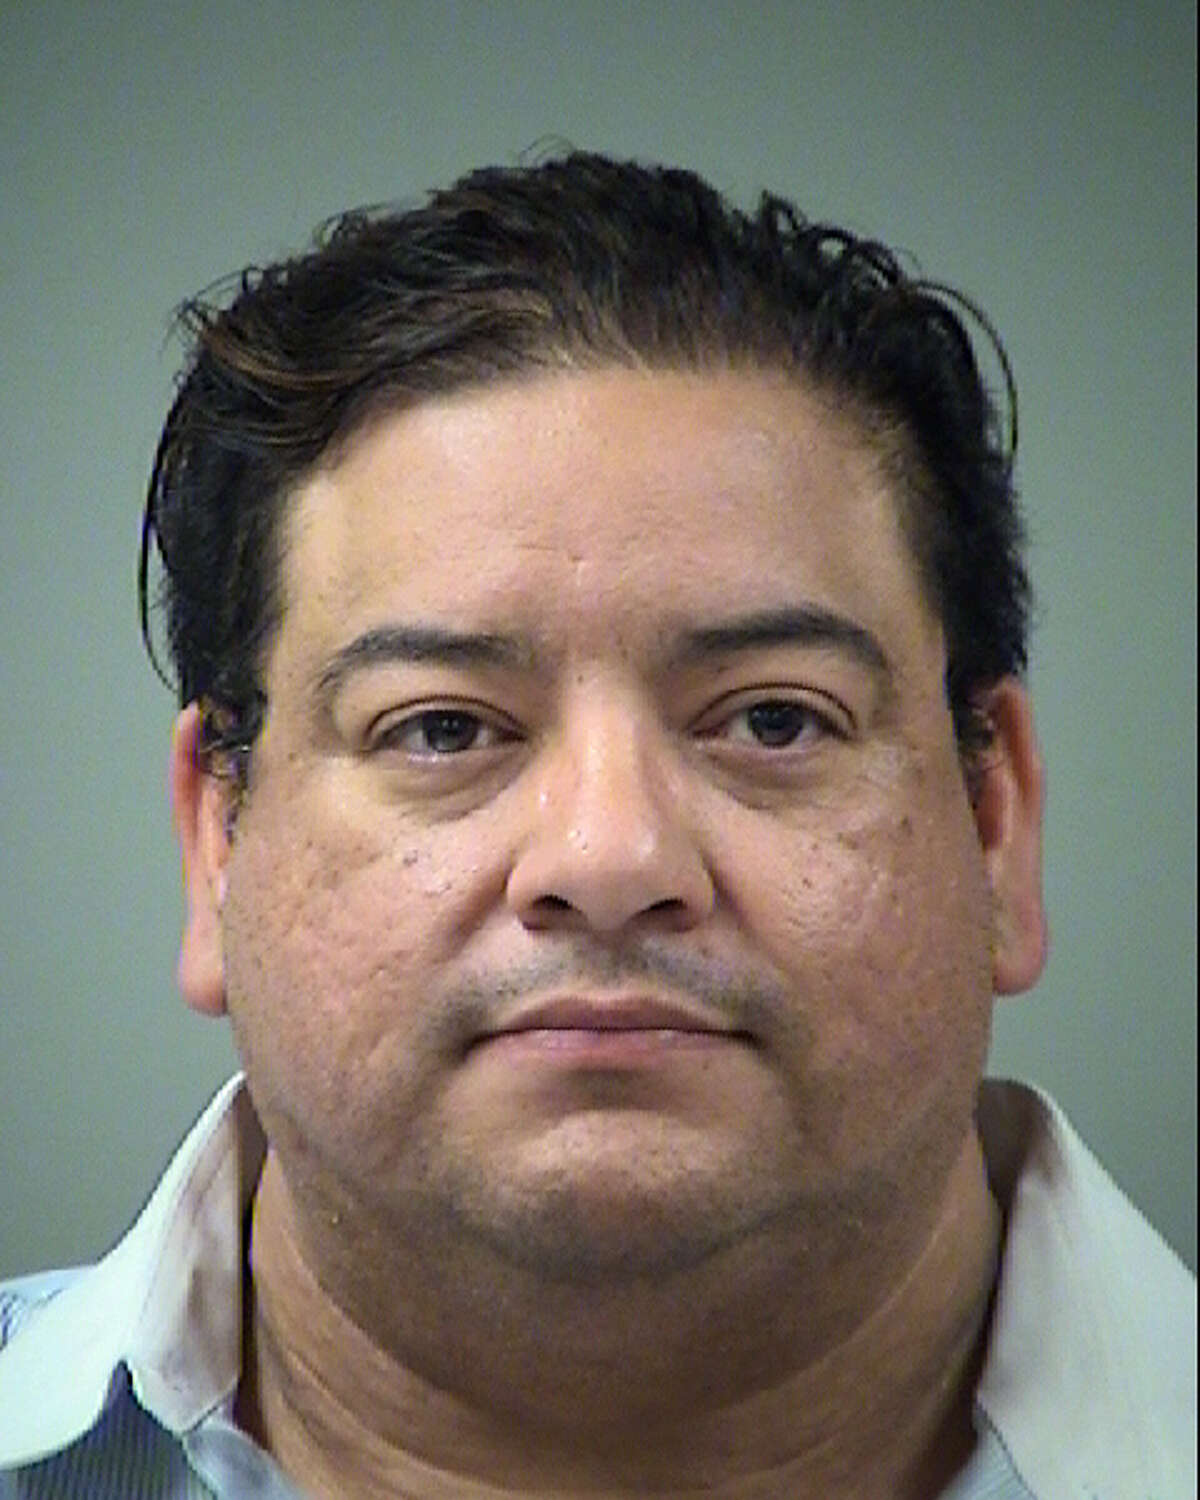 Jesse Hernandez, 39, now faces a charge of drunken driving. He was booked into the Bexar County Jail on Saturday and bailed out later that day.